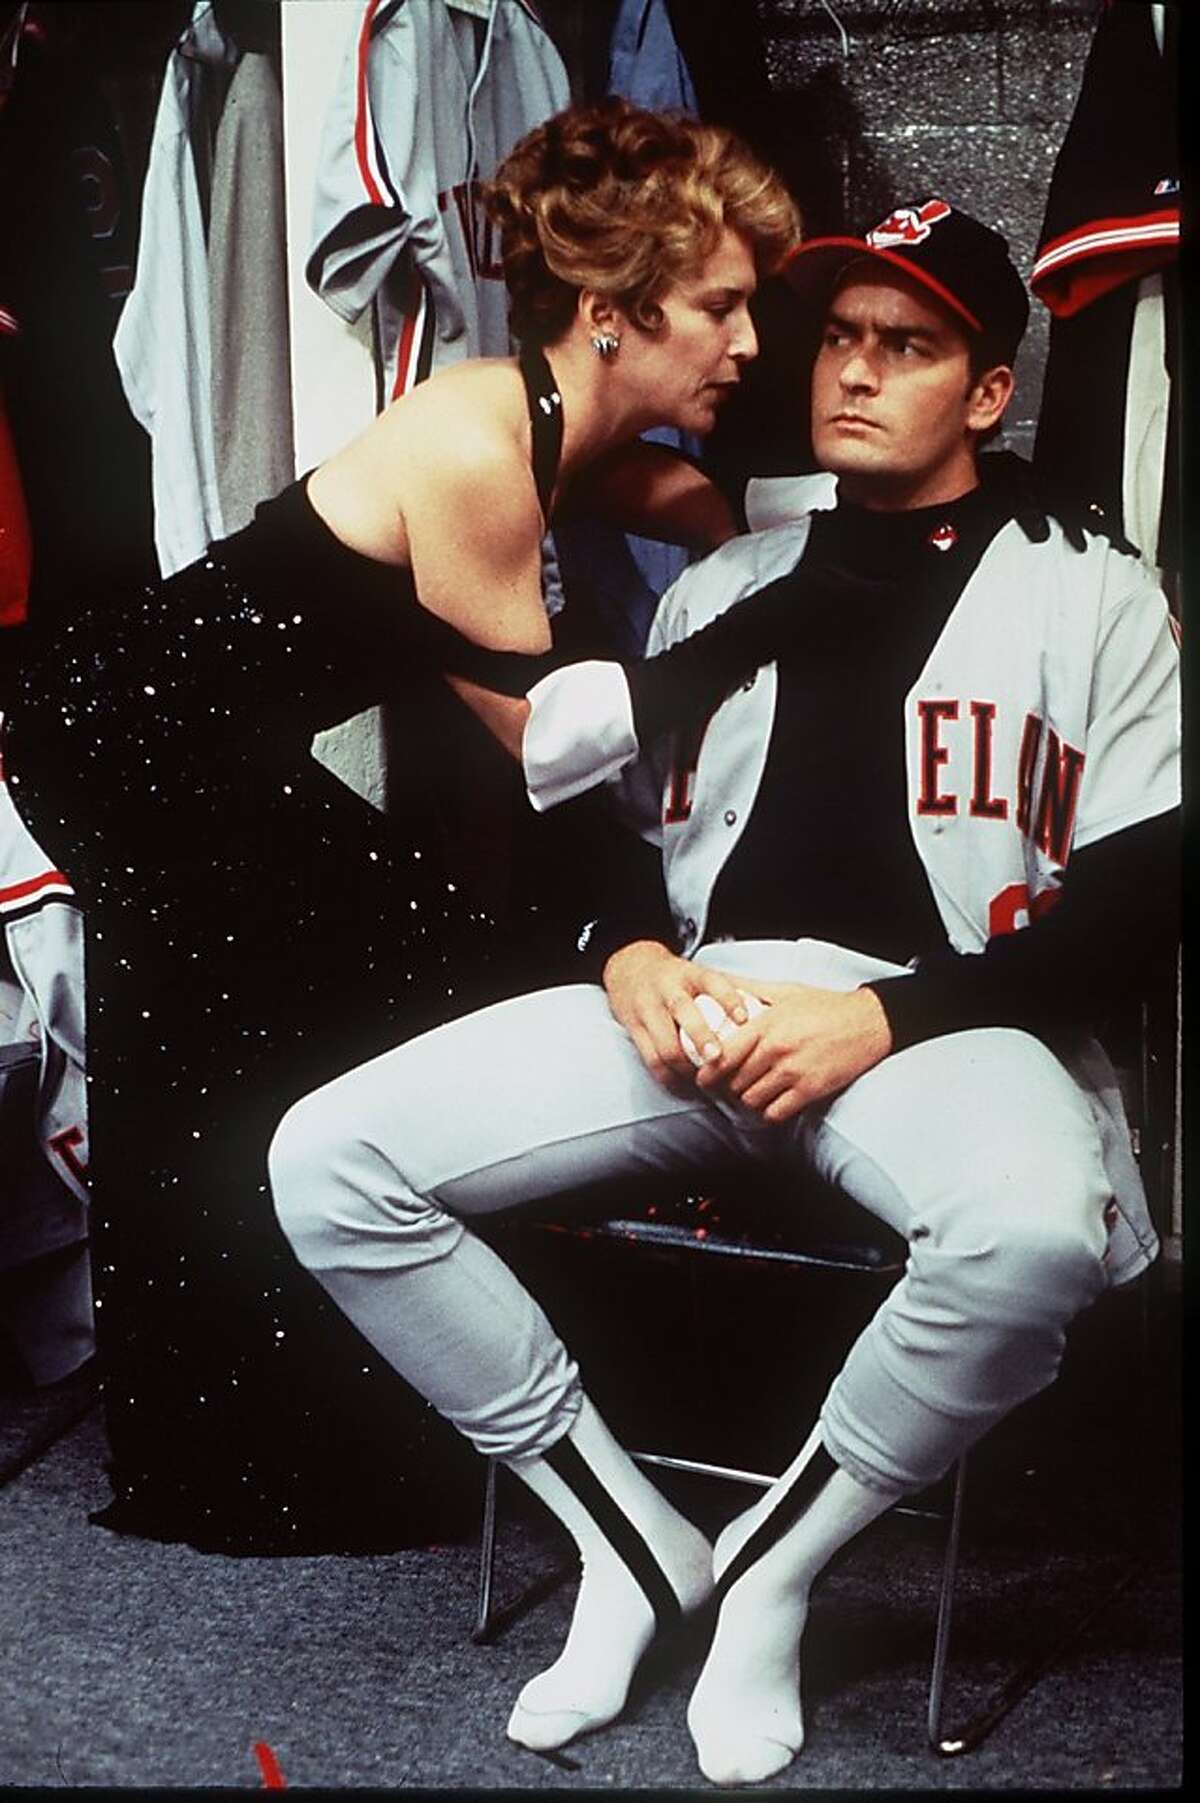 Cleveland Indians team owner Rachel Phelps (Maragaret Whitton) gives her version of a pep talk to pitcher Rick Vaughn (Charlie Sheen) in the 1989 movie "Major League." The tale of the 2012 Oakaland A's mirrors the movie, with a owner who attempts to lower attendance to allow the team to move.